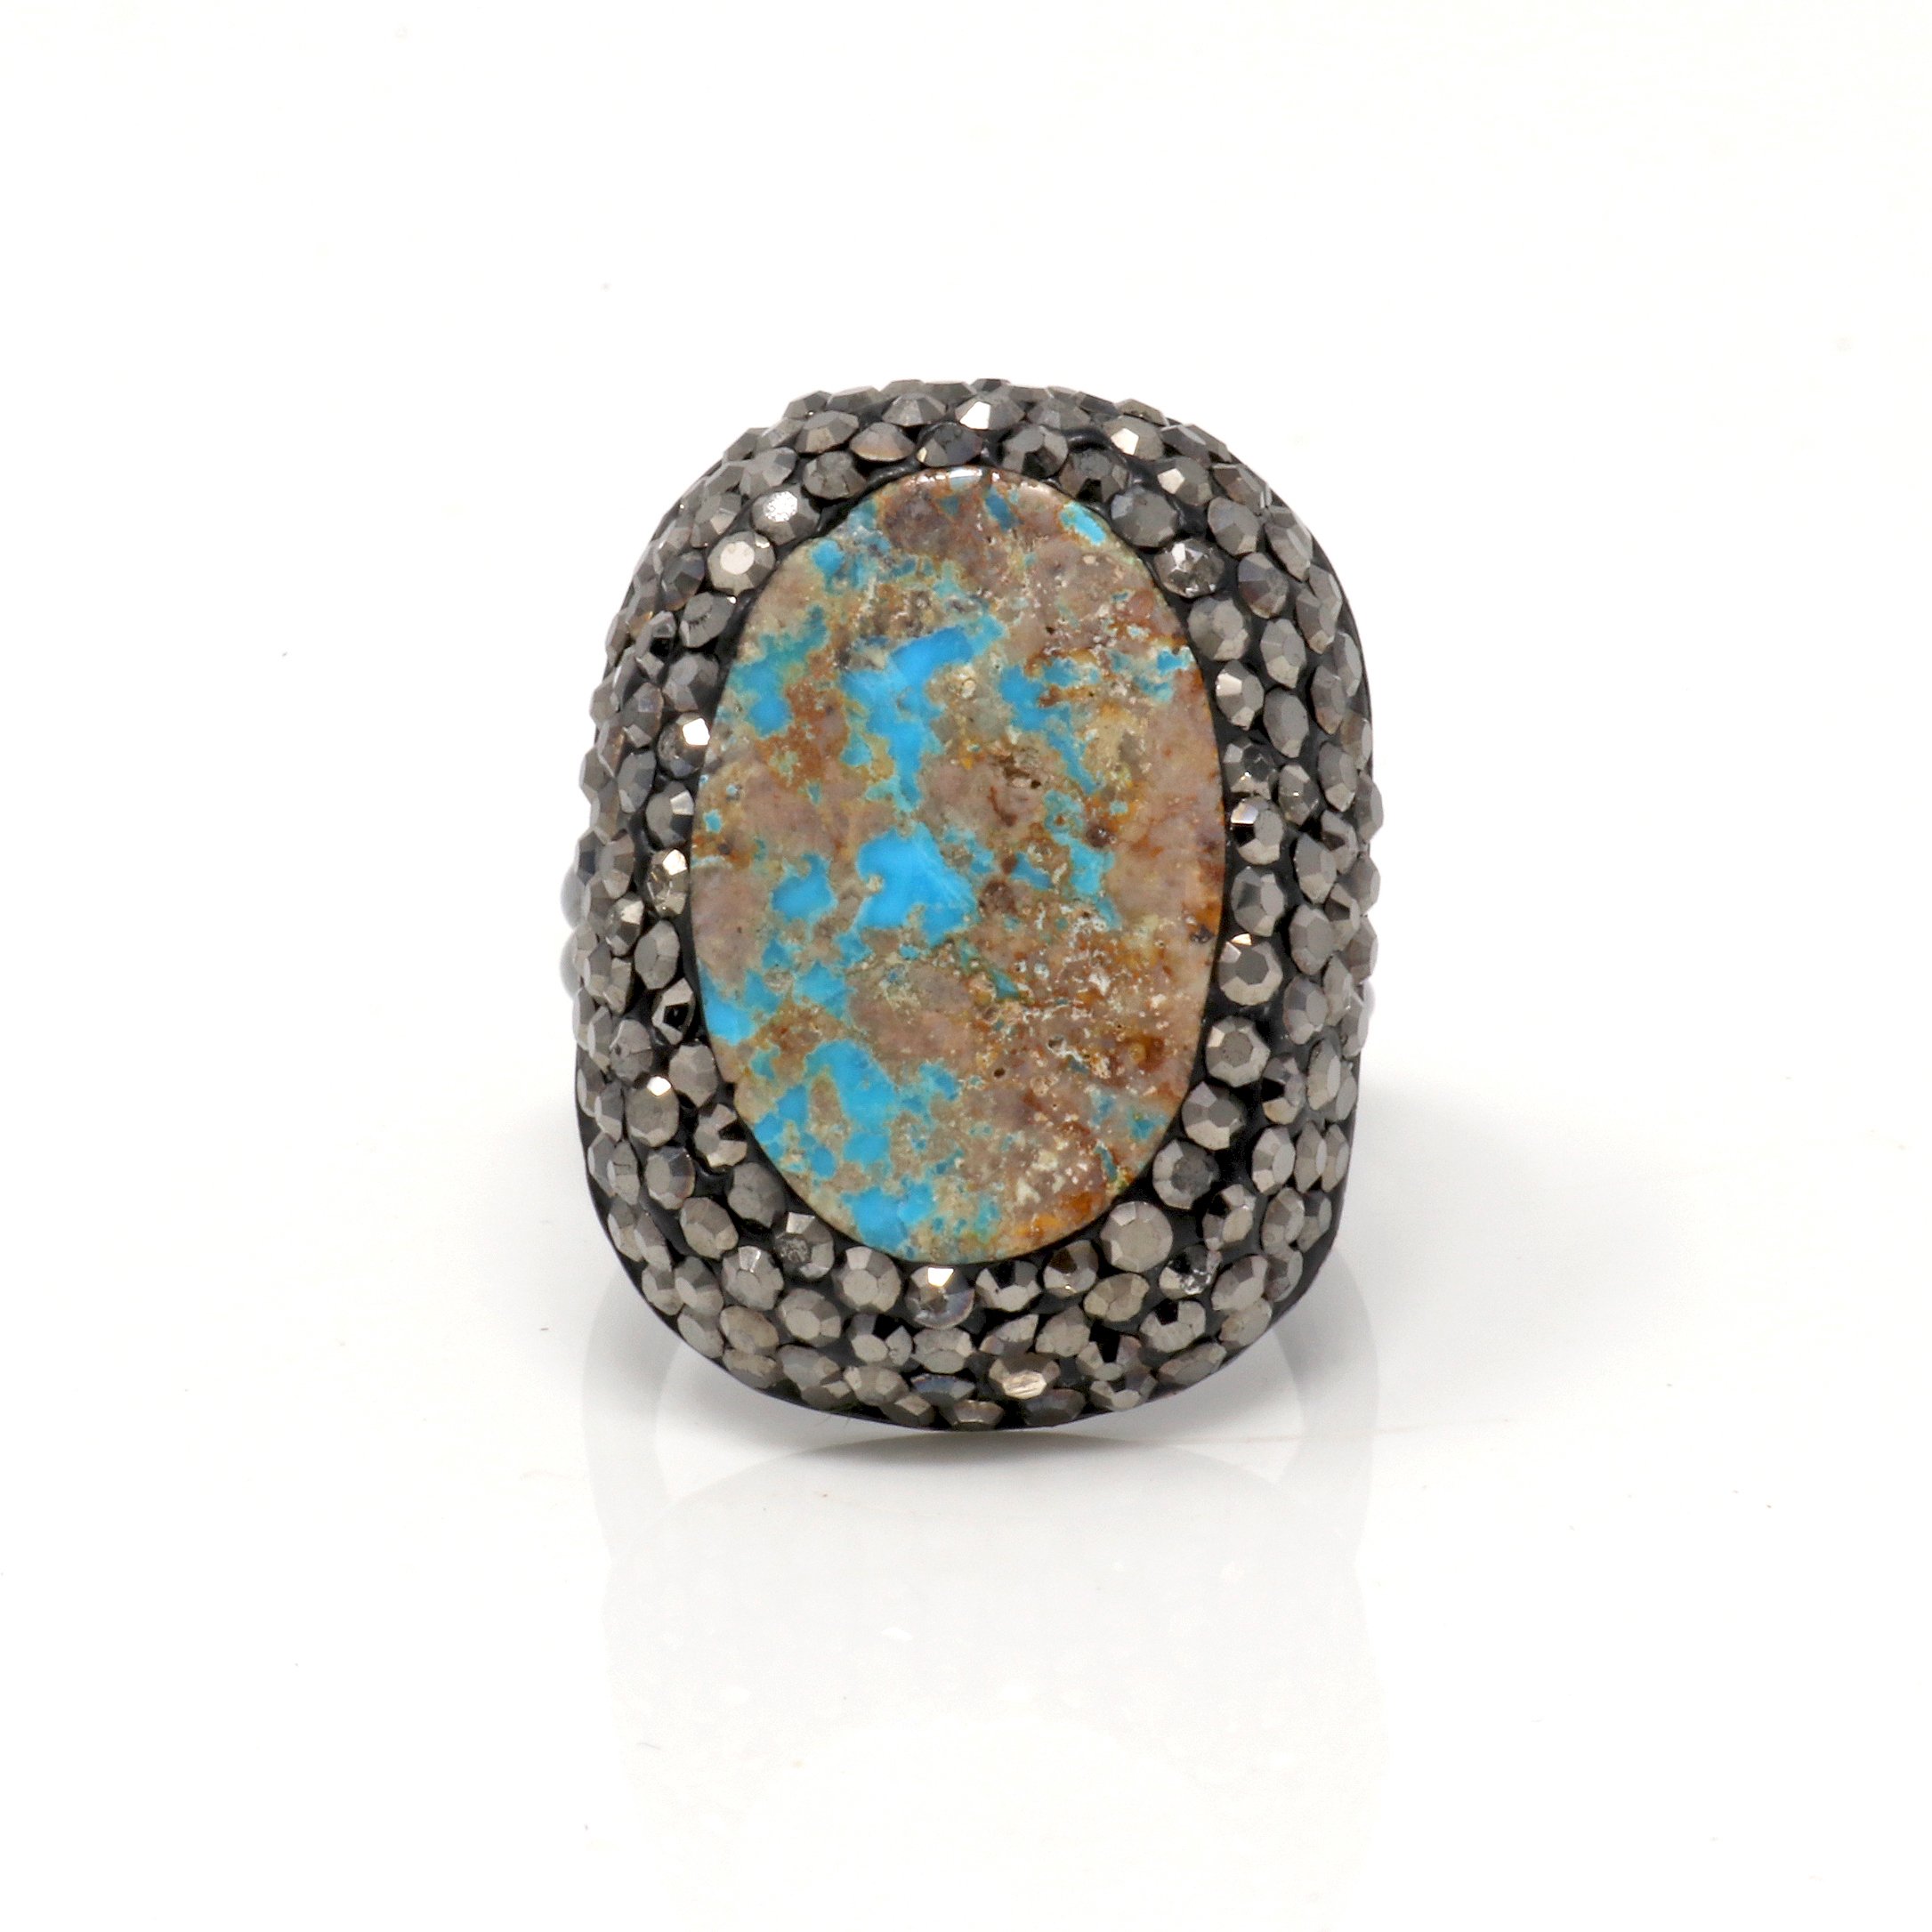 Persian Turquoise Adjustable Size Ring -Oval With Marcasite & Adjustable Double Band -Classic Blue With Beige